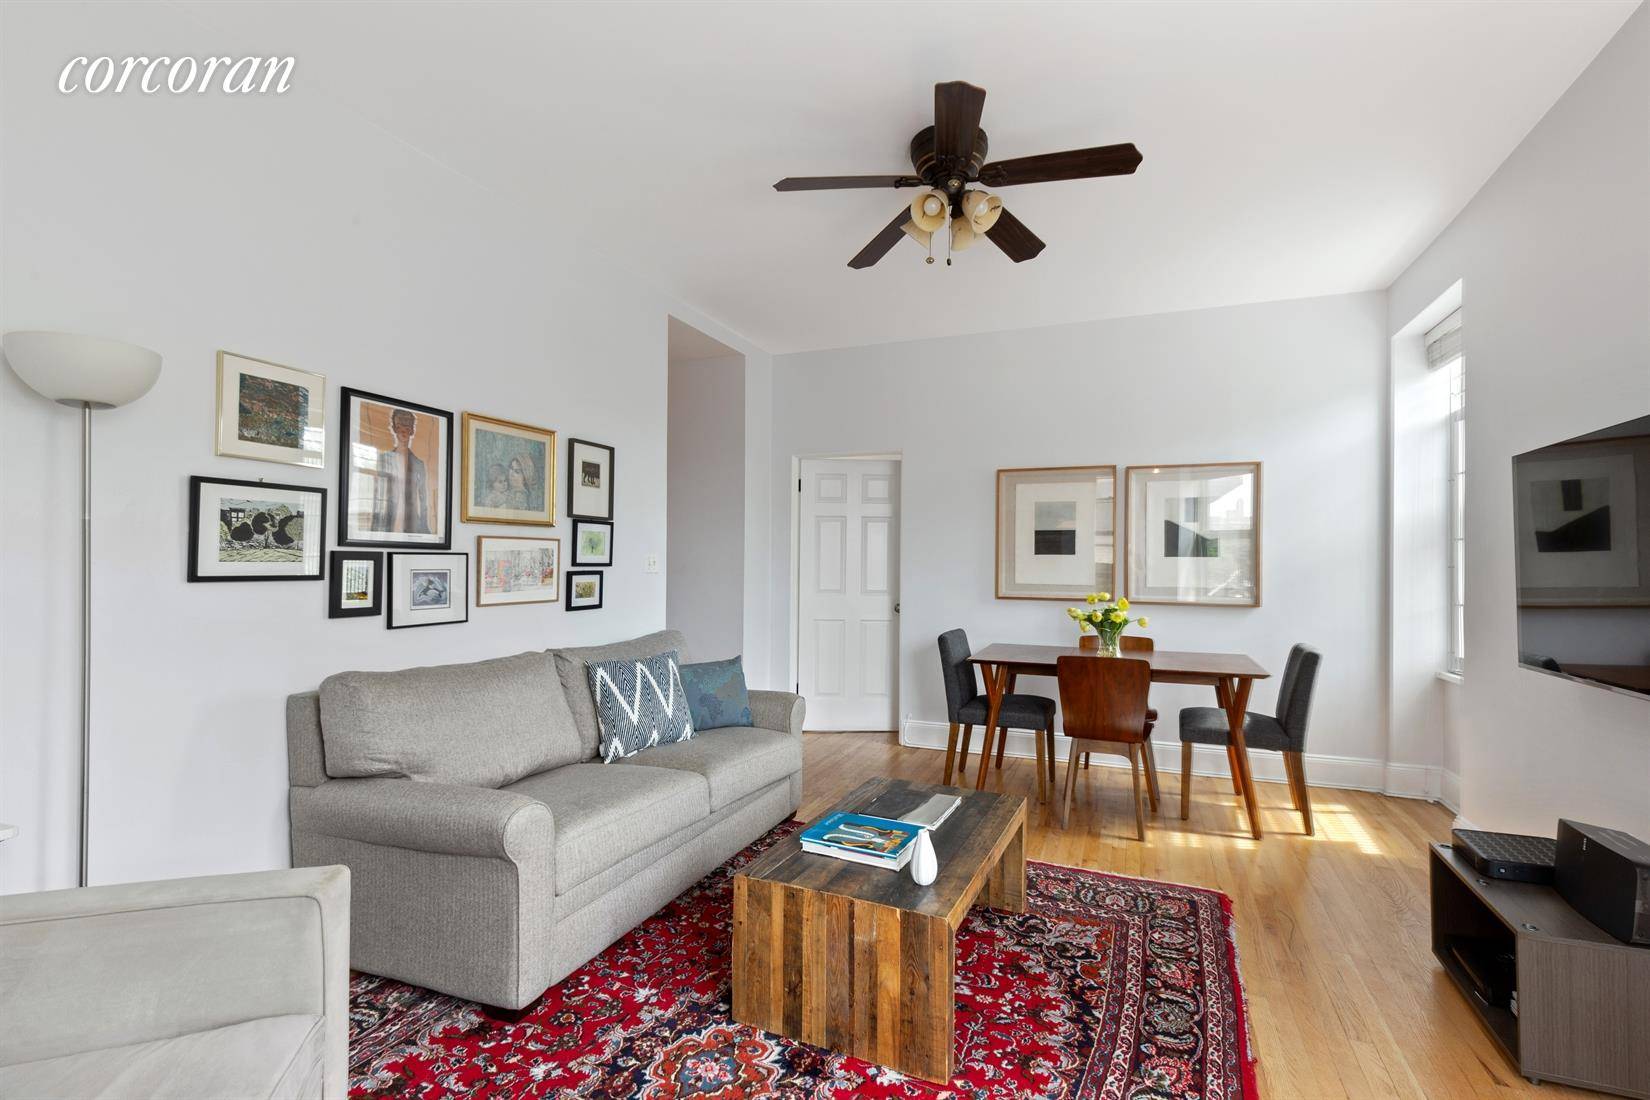 SHOWN BY APPOINTMENT ONLY DIRECTLY ACROSS FROM PROSPECT PARK, on coveted Prospect Park West, this lovely two bedroom home boasts a great layout, generously sized rooms, and serene park views.